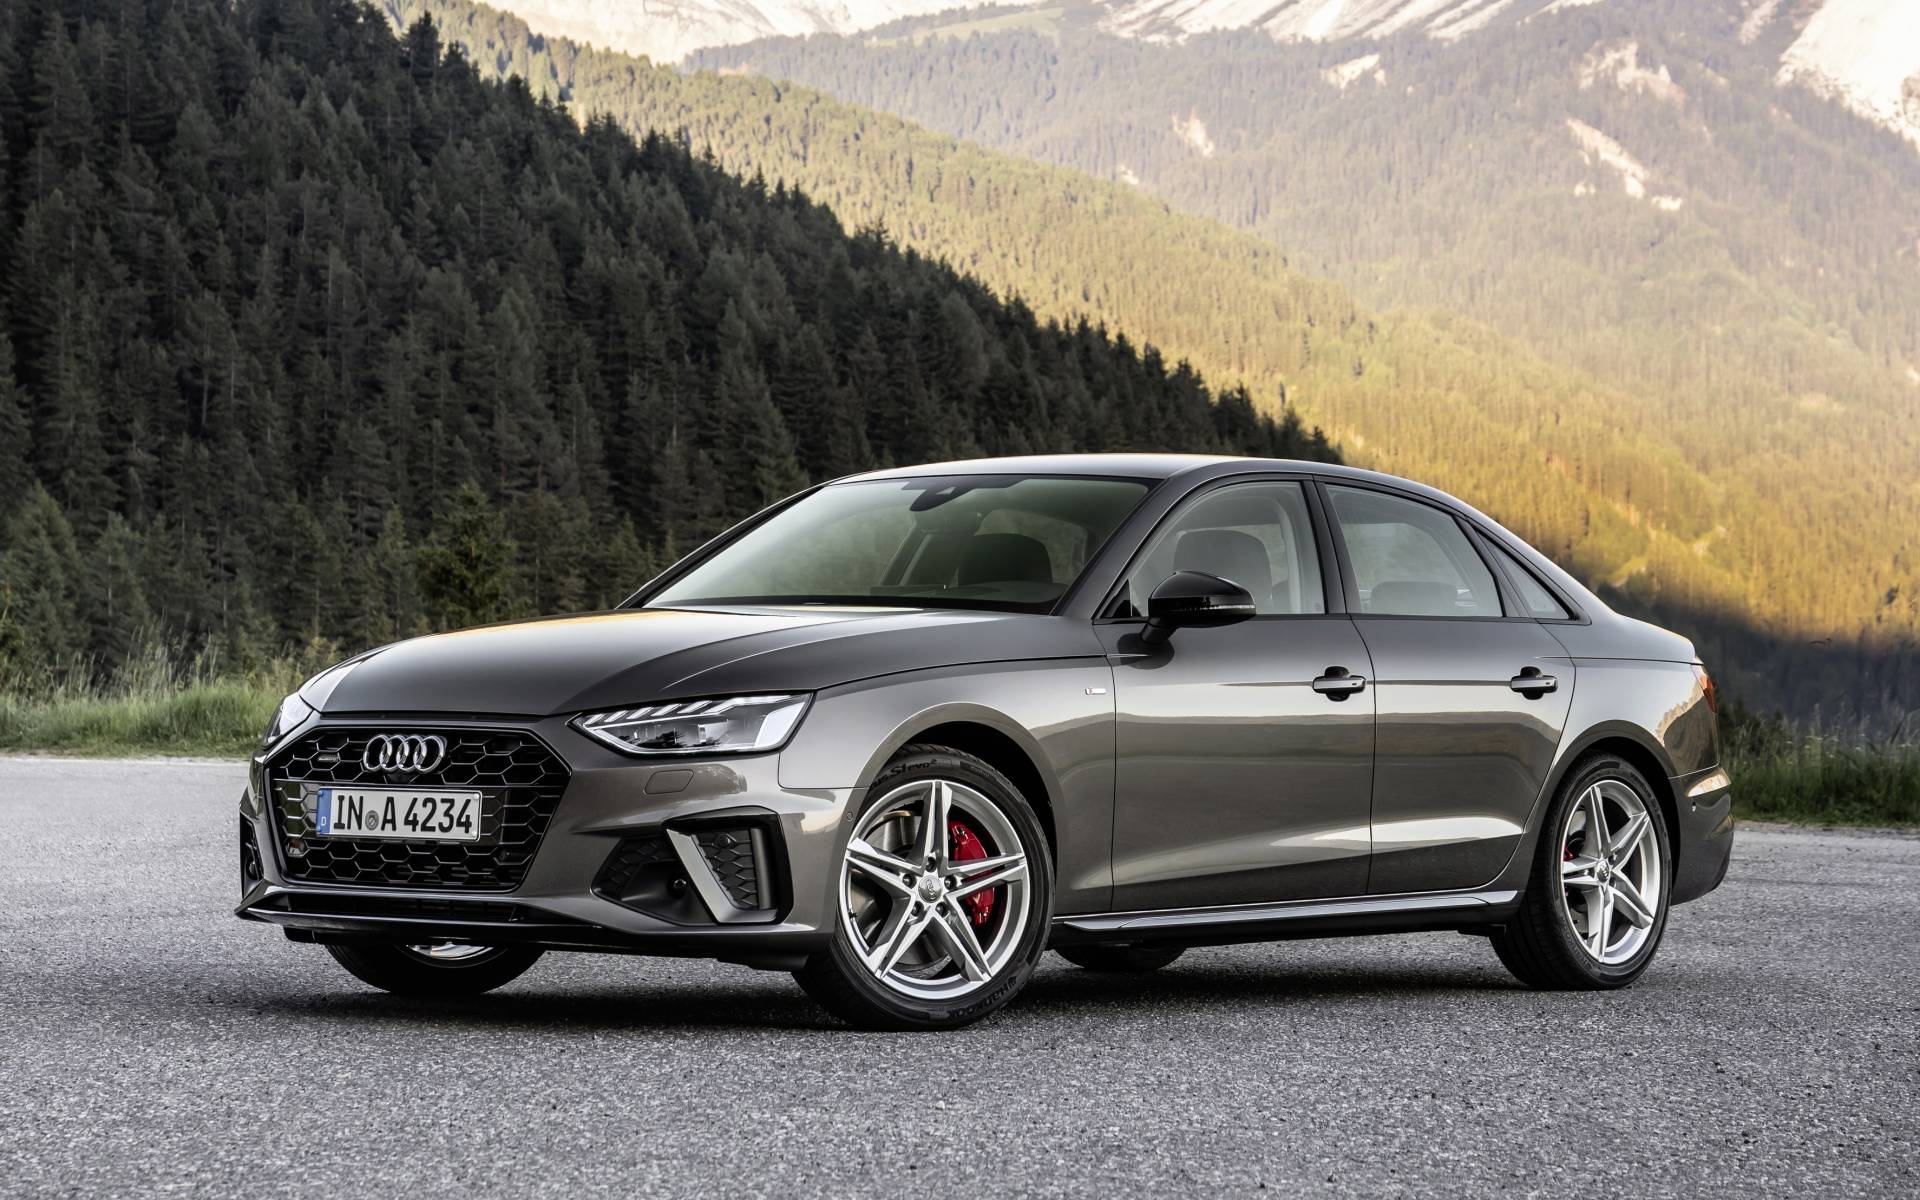 2020 Audi A4 News Reviews Picture Galleries And Videos The